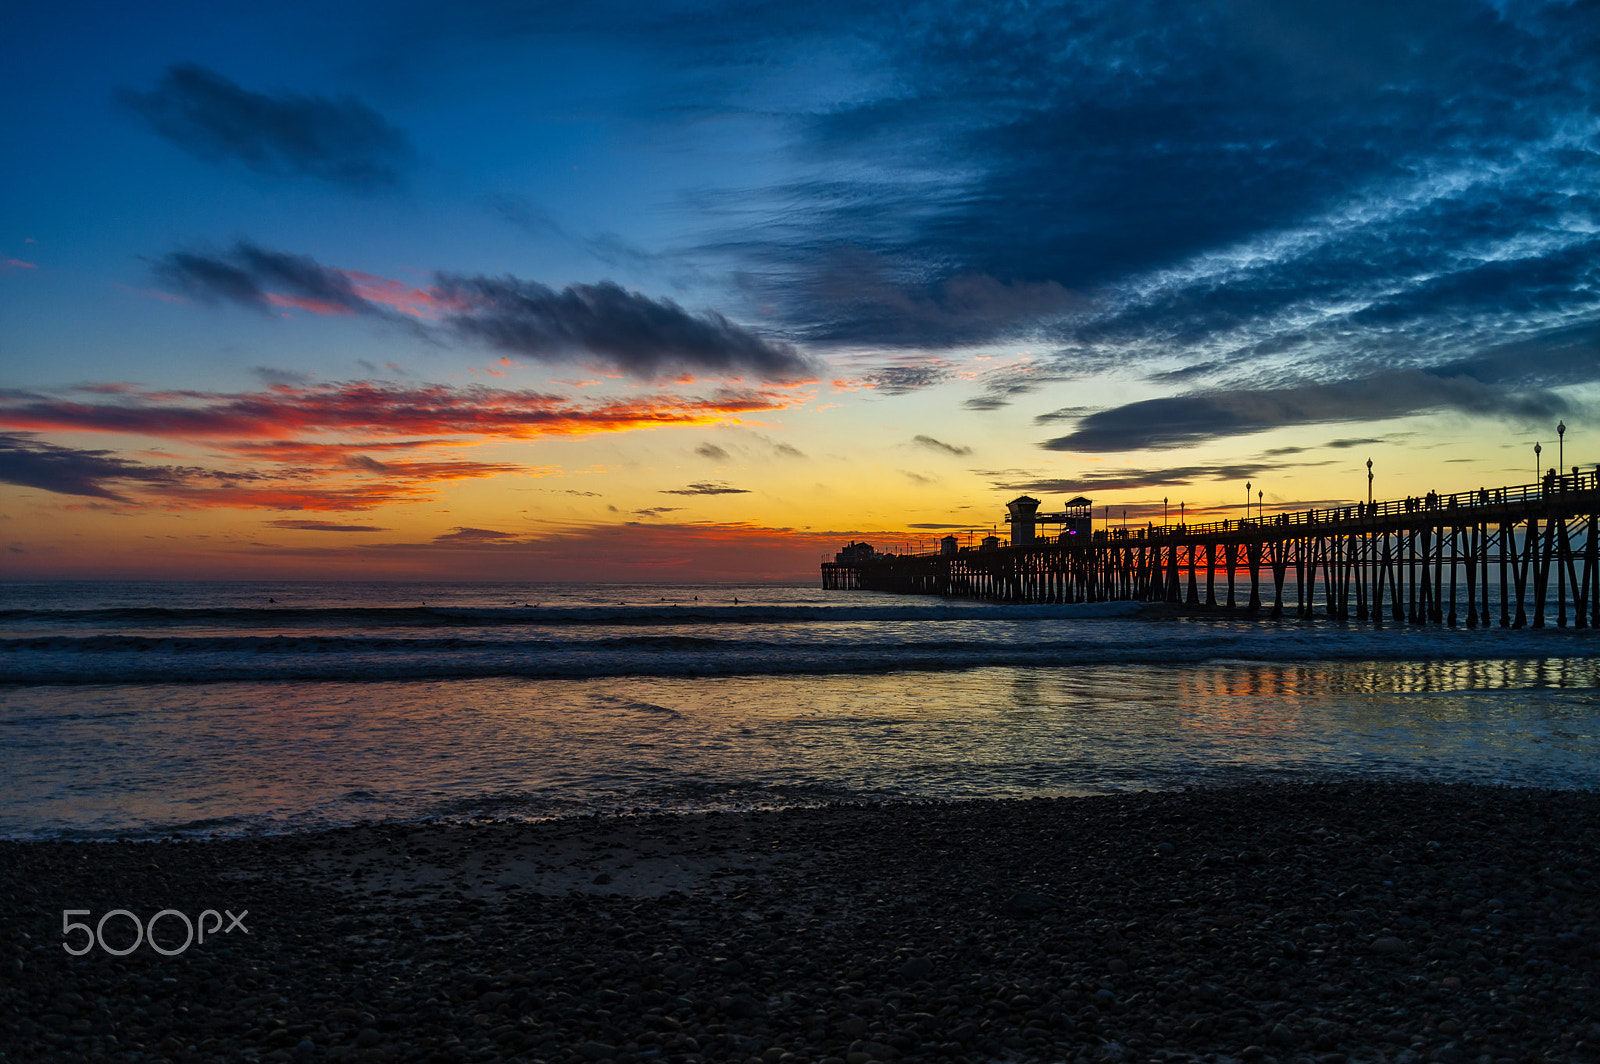 Nikon D700 sample photo. Evening at the oceanside pier - february 16, 2017 photography